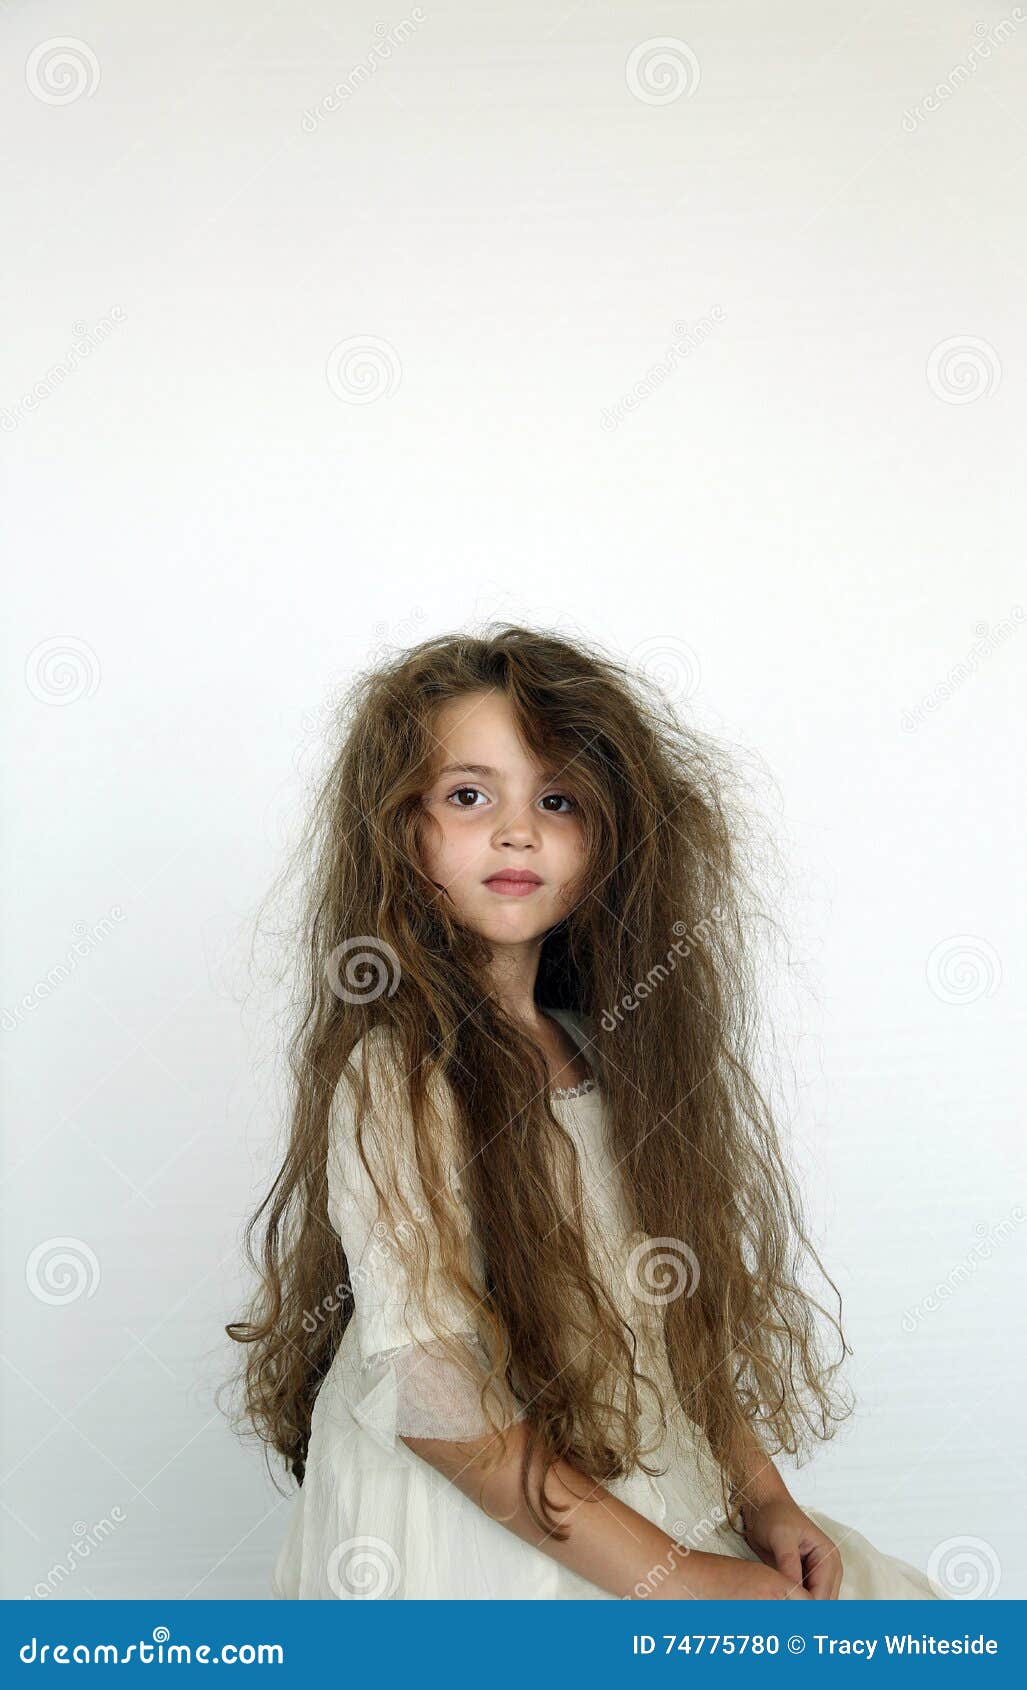 Messy hair girl stock photo. Image of frizz, beauty, real - 74775780